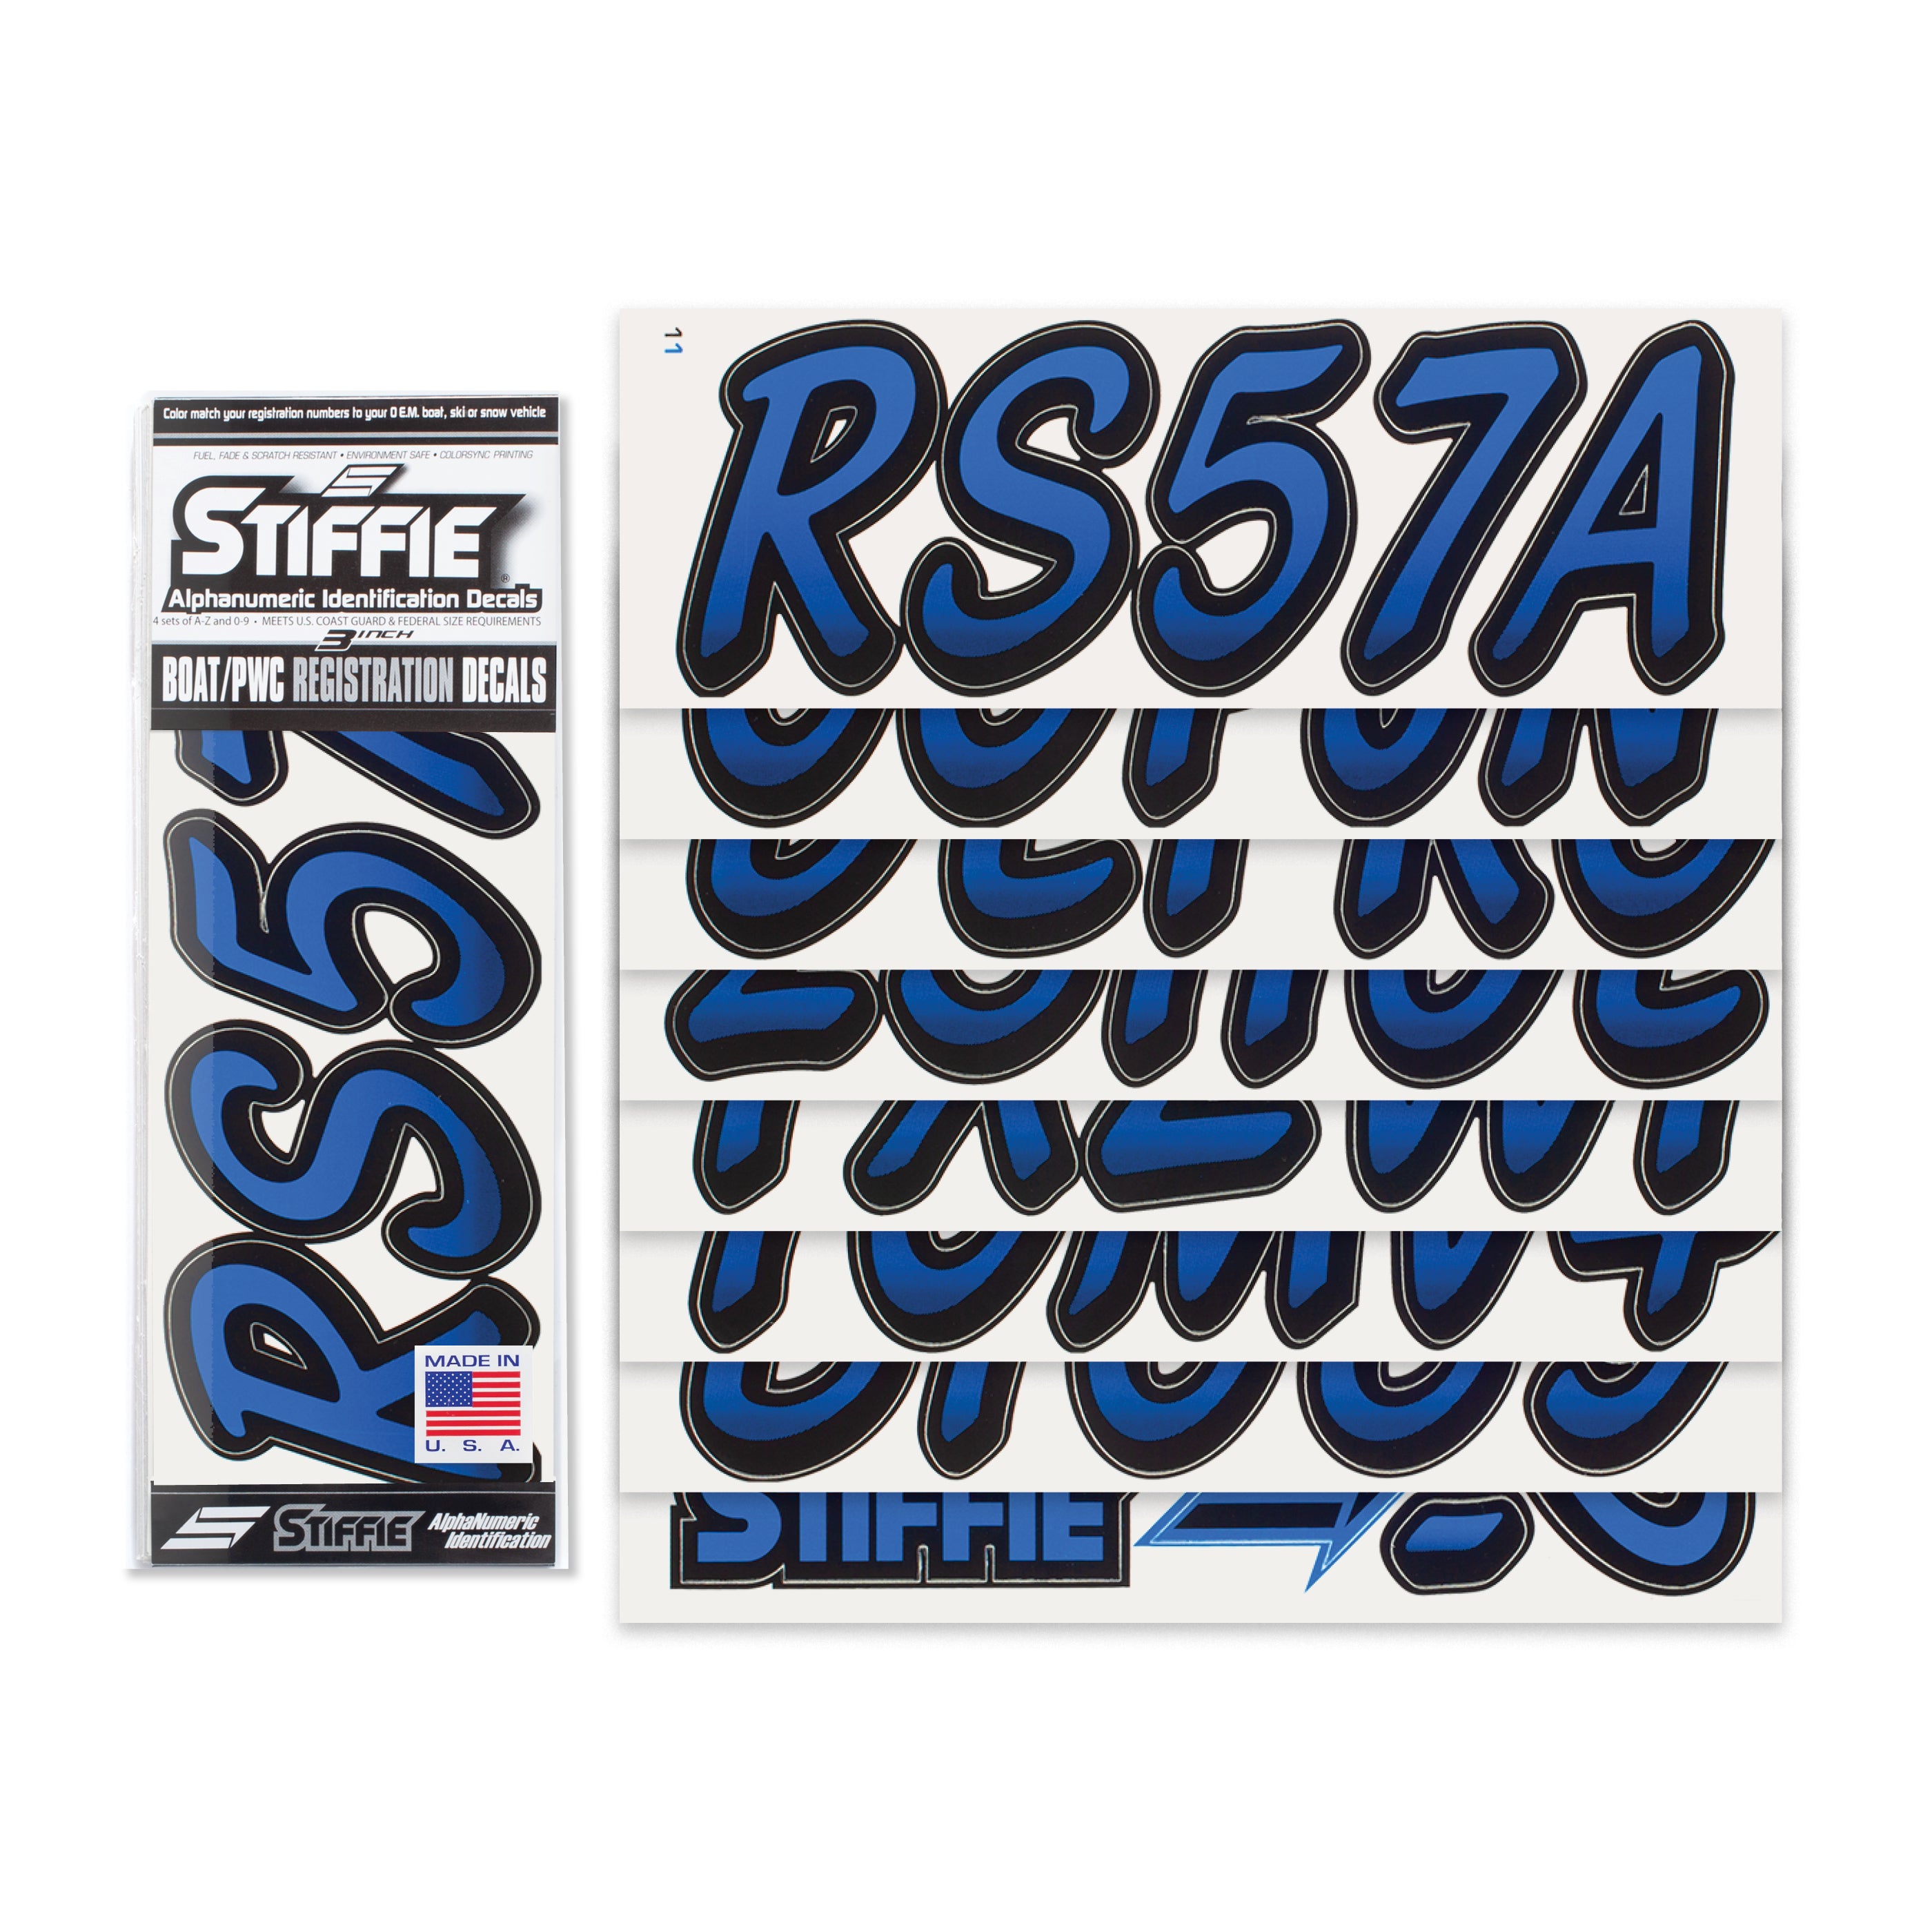 Stiffie Whipline Blue/Black 3" Alpha-Numeric Registration Identification Numbers Stickers Decals for Boats & Personal Watercraft